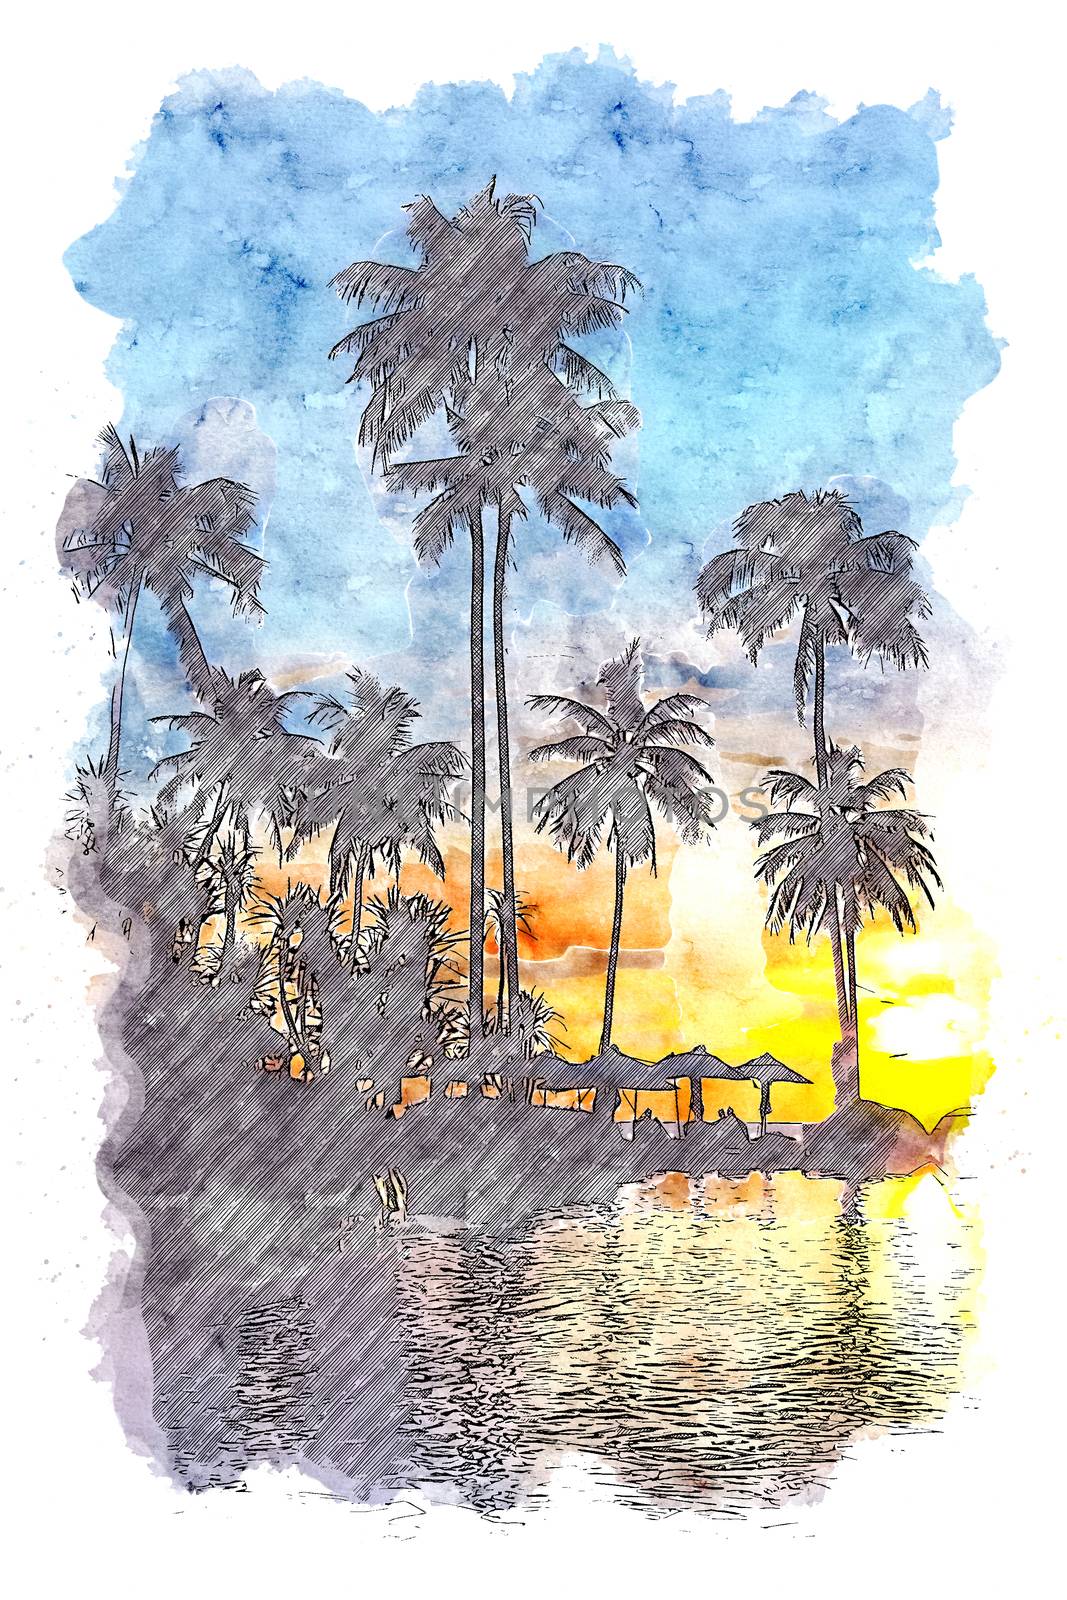 watercolor and illustration of Sunset at tropical beach resort.